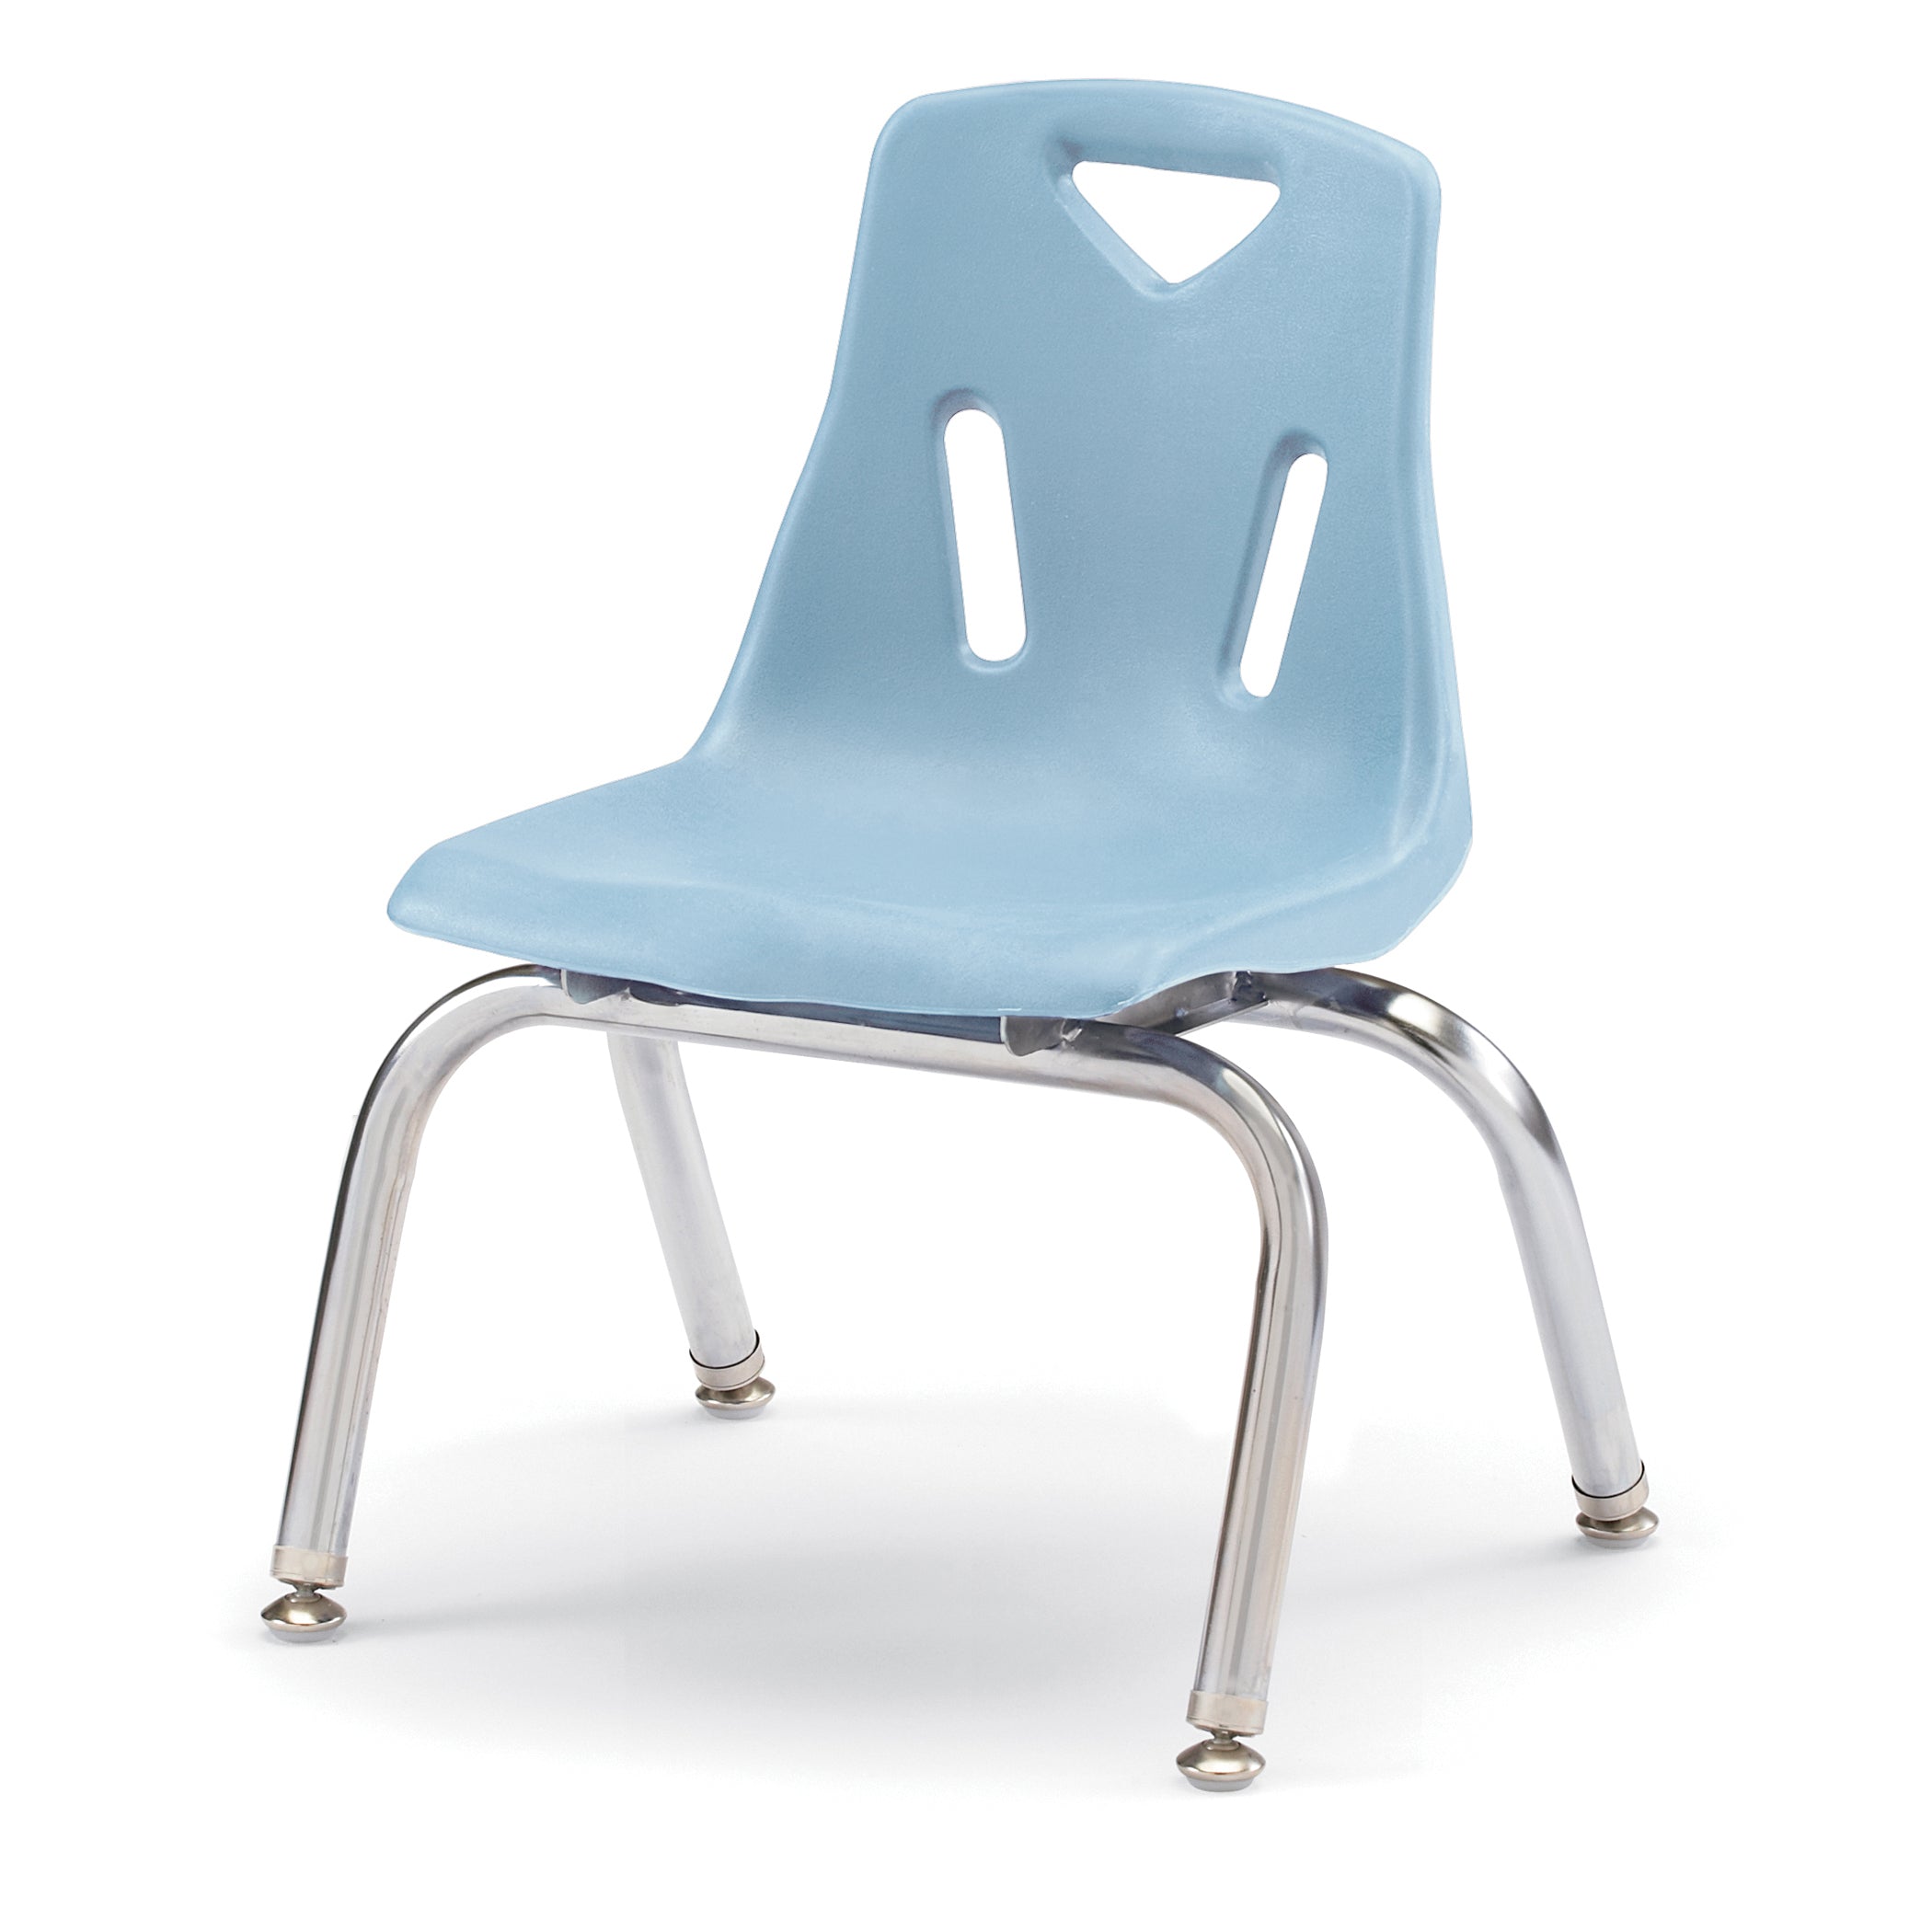 8140JC1131, Berries Stacking Chair with Chrome-Plated Legs - 10" Ht - Coastal Blue